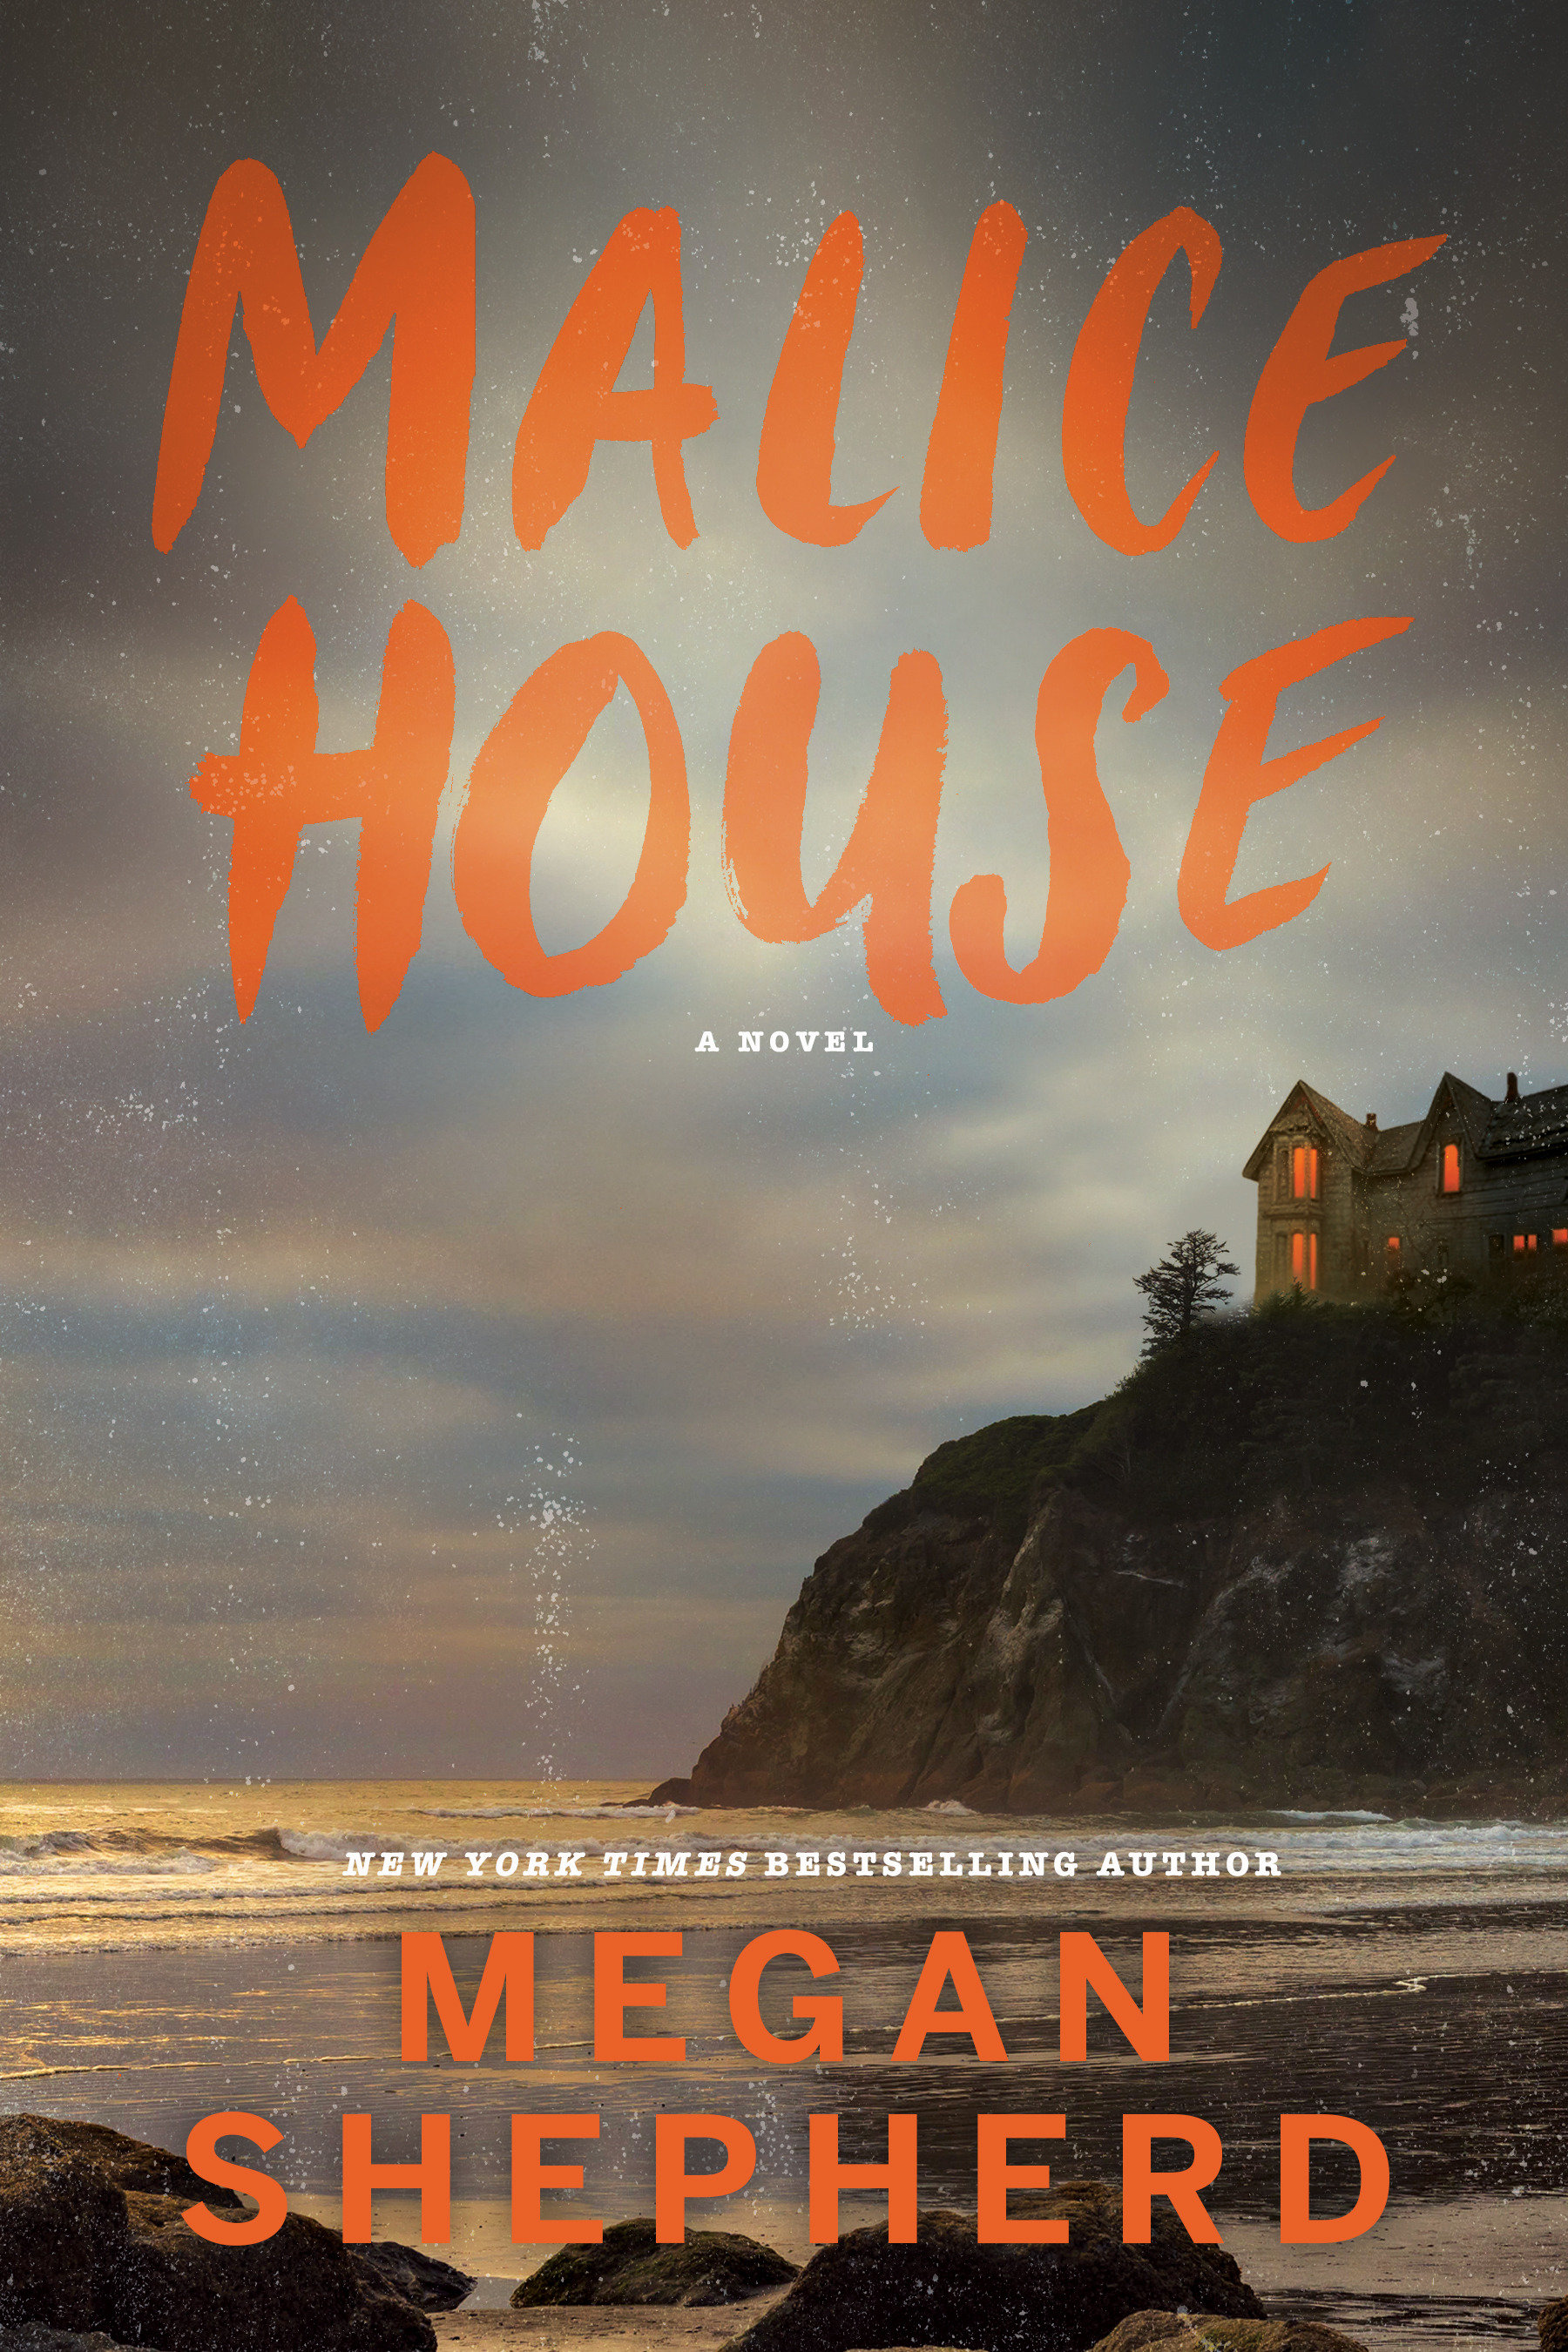 Malice House (Hardcover Book)